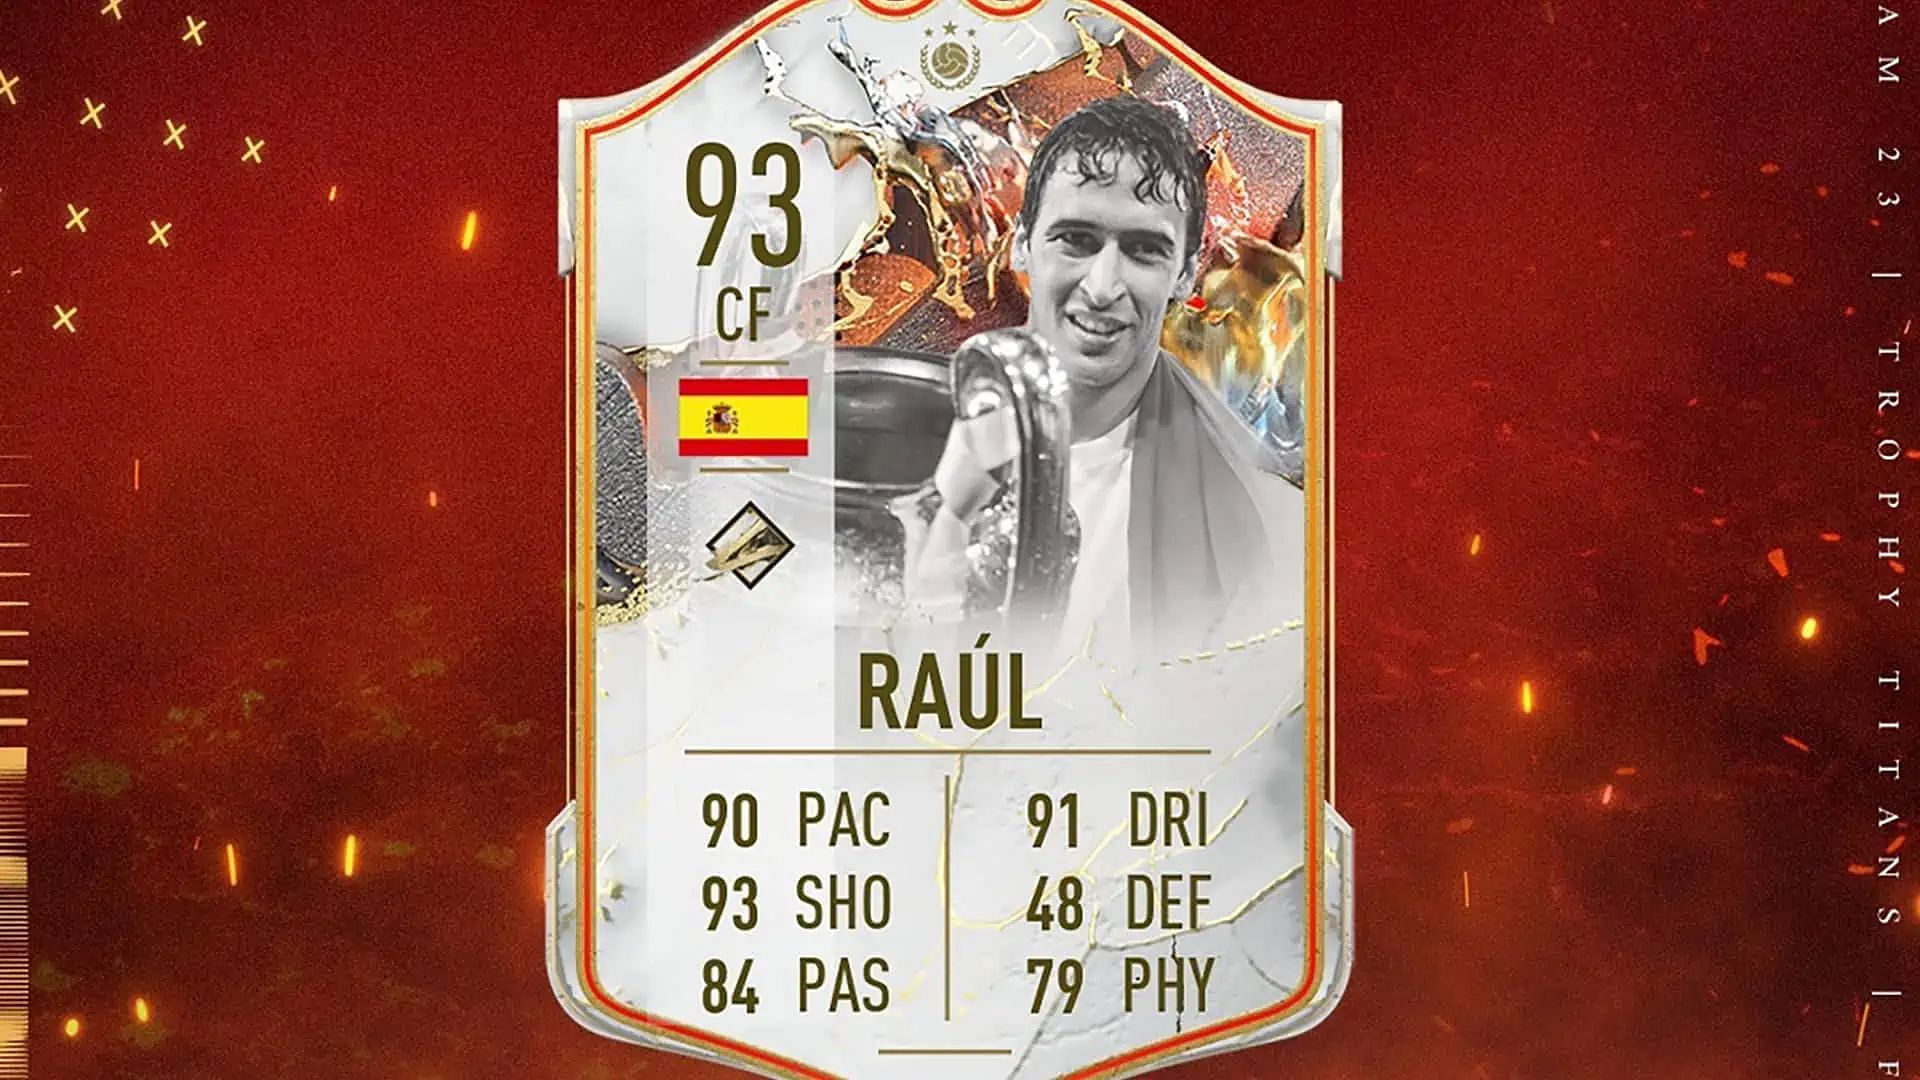 The Raul Trophy Titans Icon SBC will be high on the wish lists of many FIFA 23 players (Image via EA Sports)